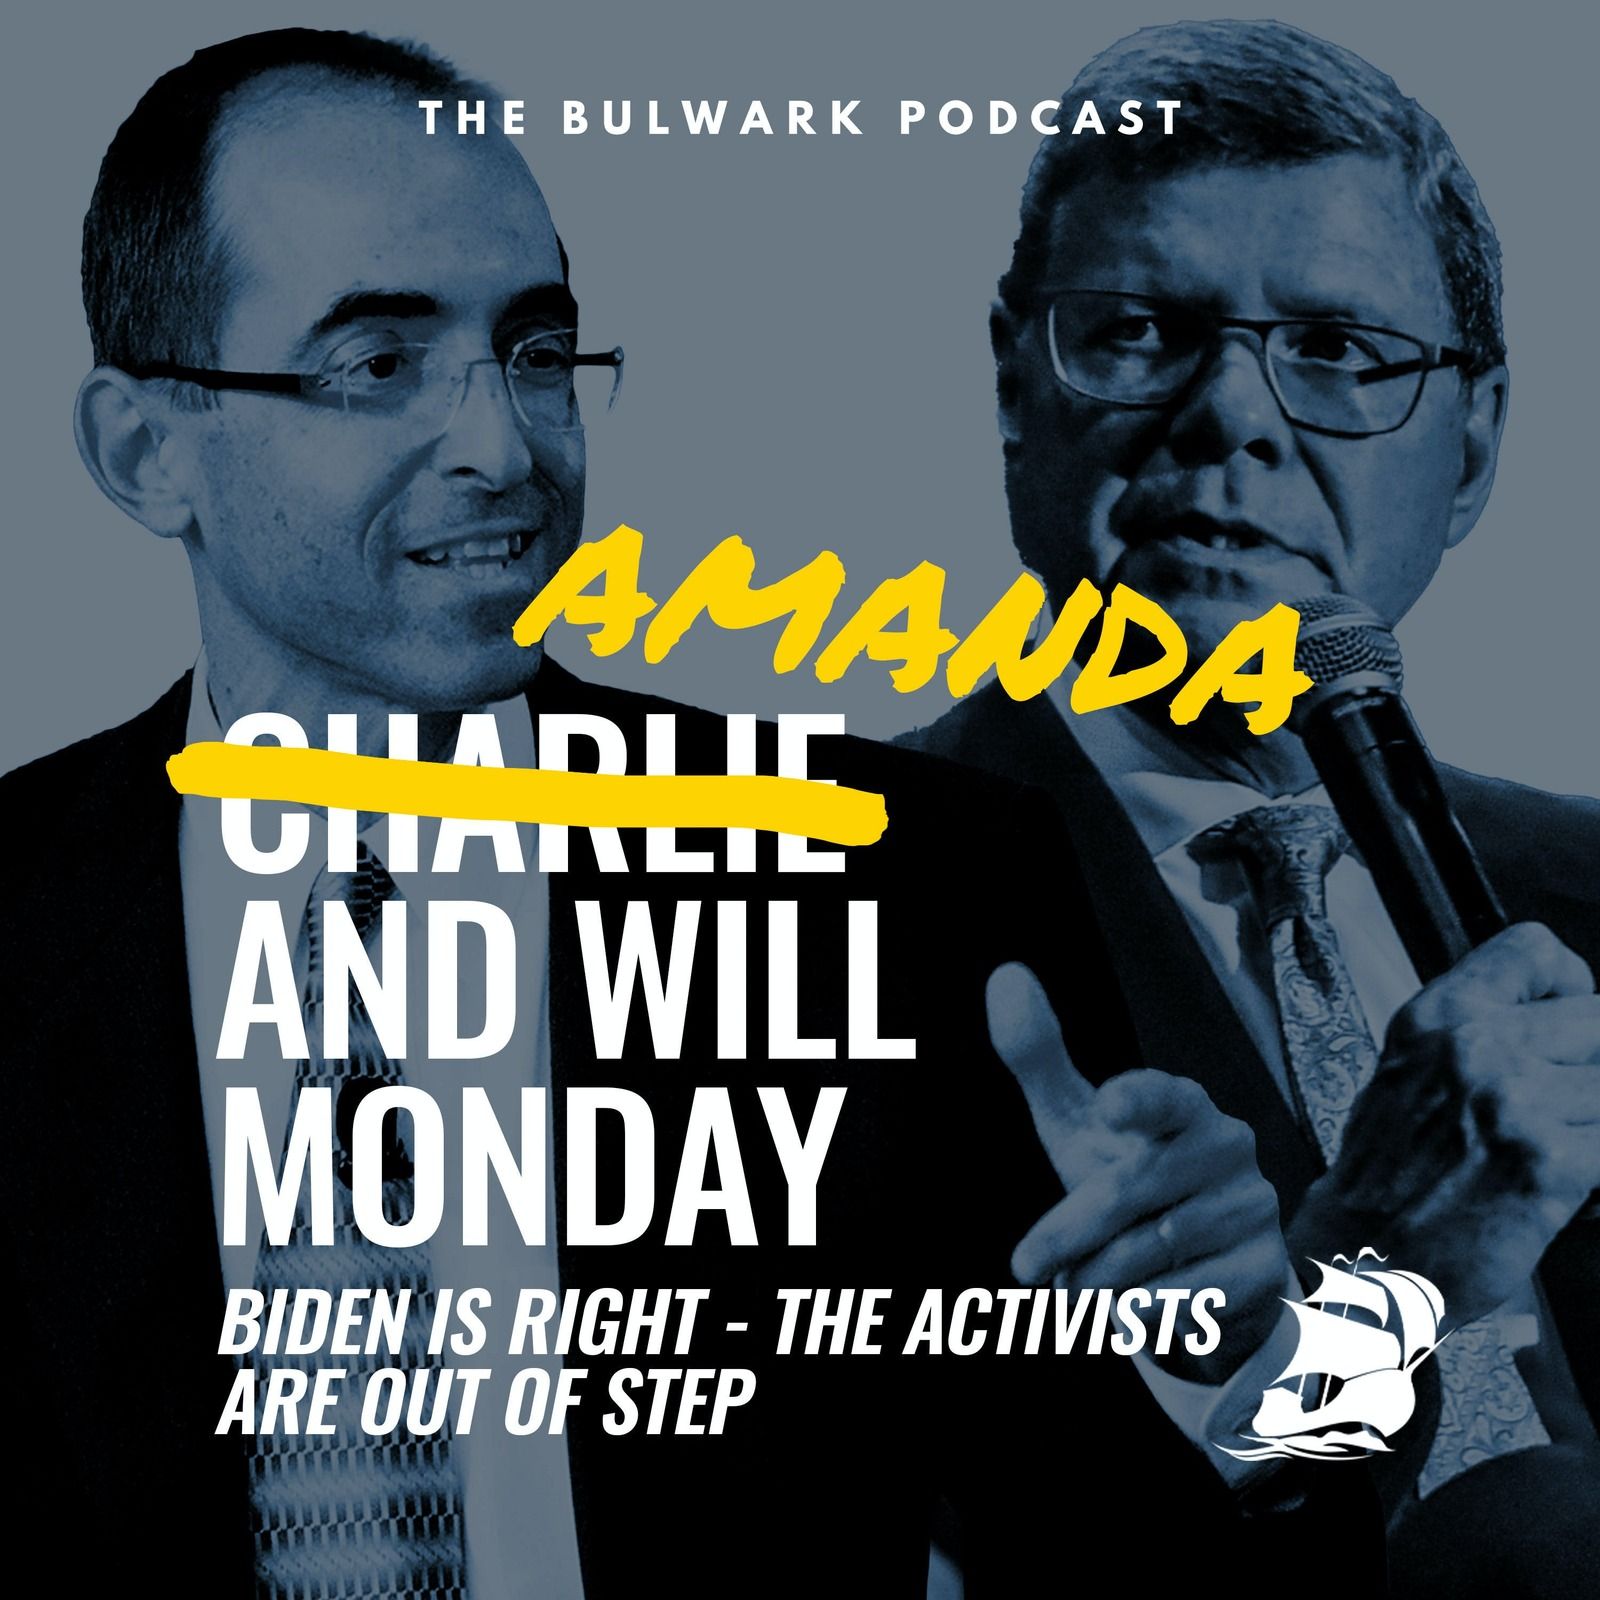 Will Saletan: Biden Is Right - The Activists Are Out of Step by The Bulwark Podcast